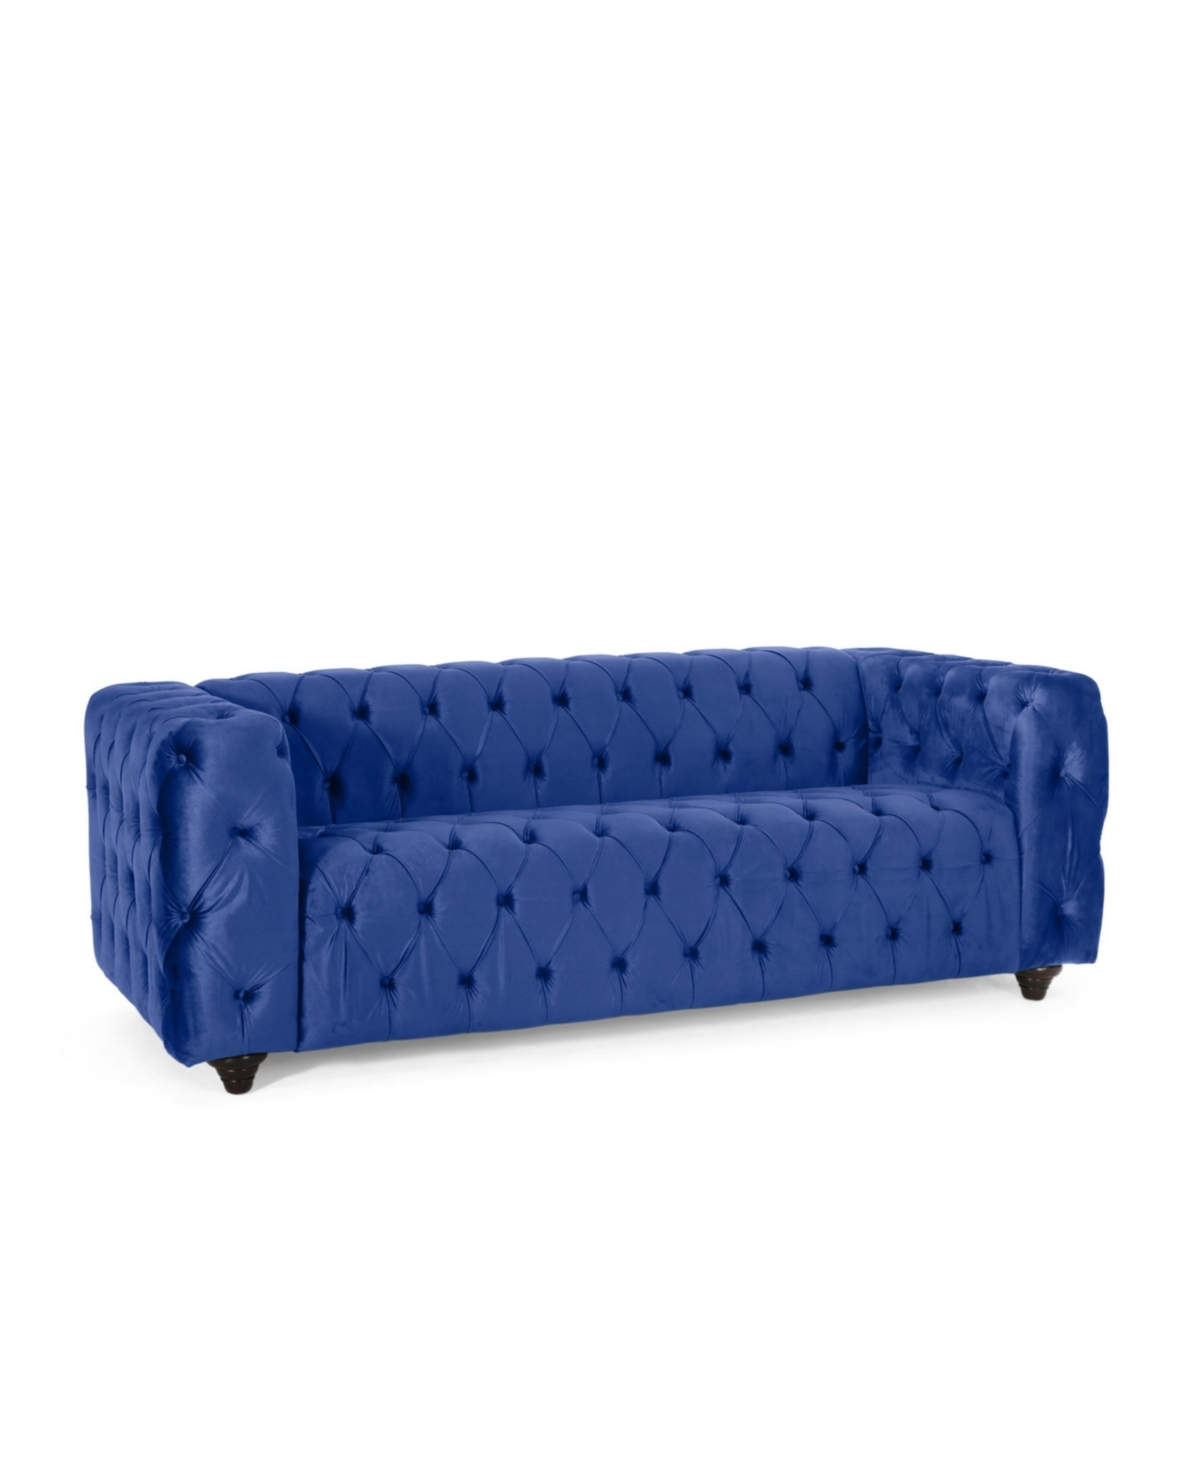 Sagewood Contemporary Tufted 3 Seater Sofa